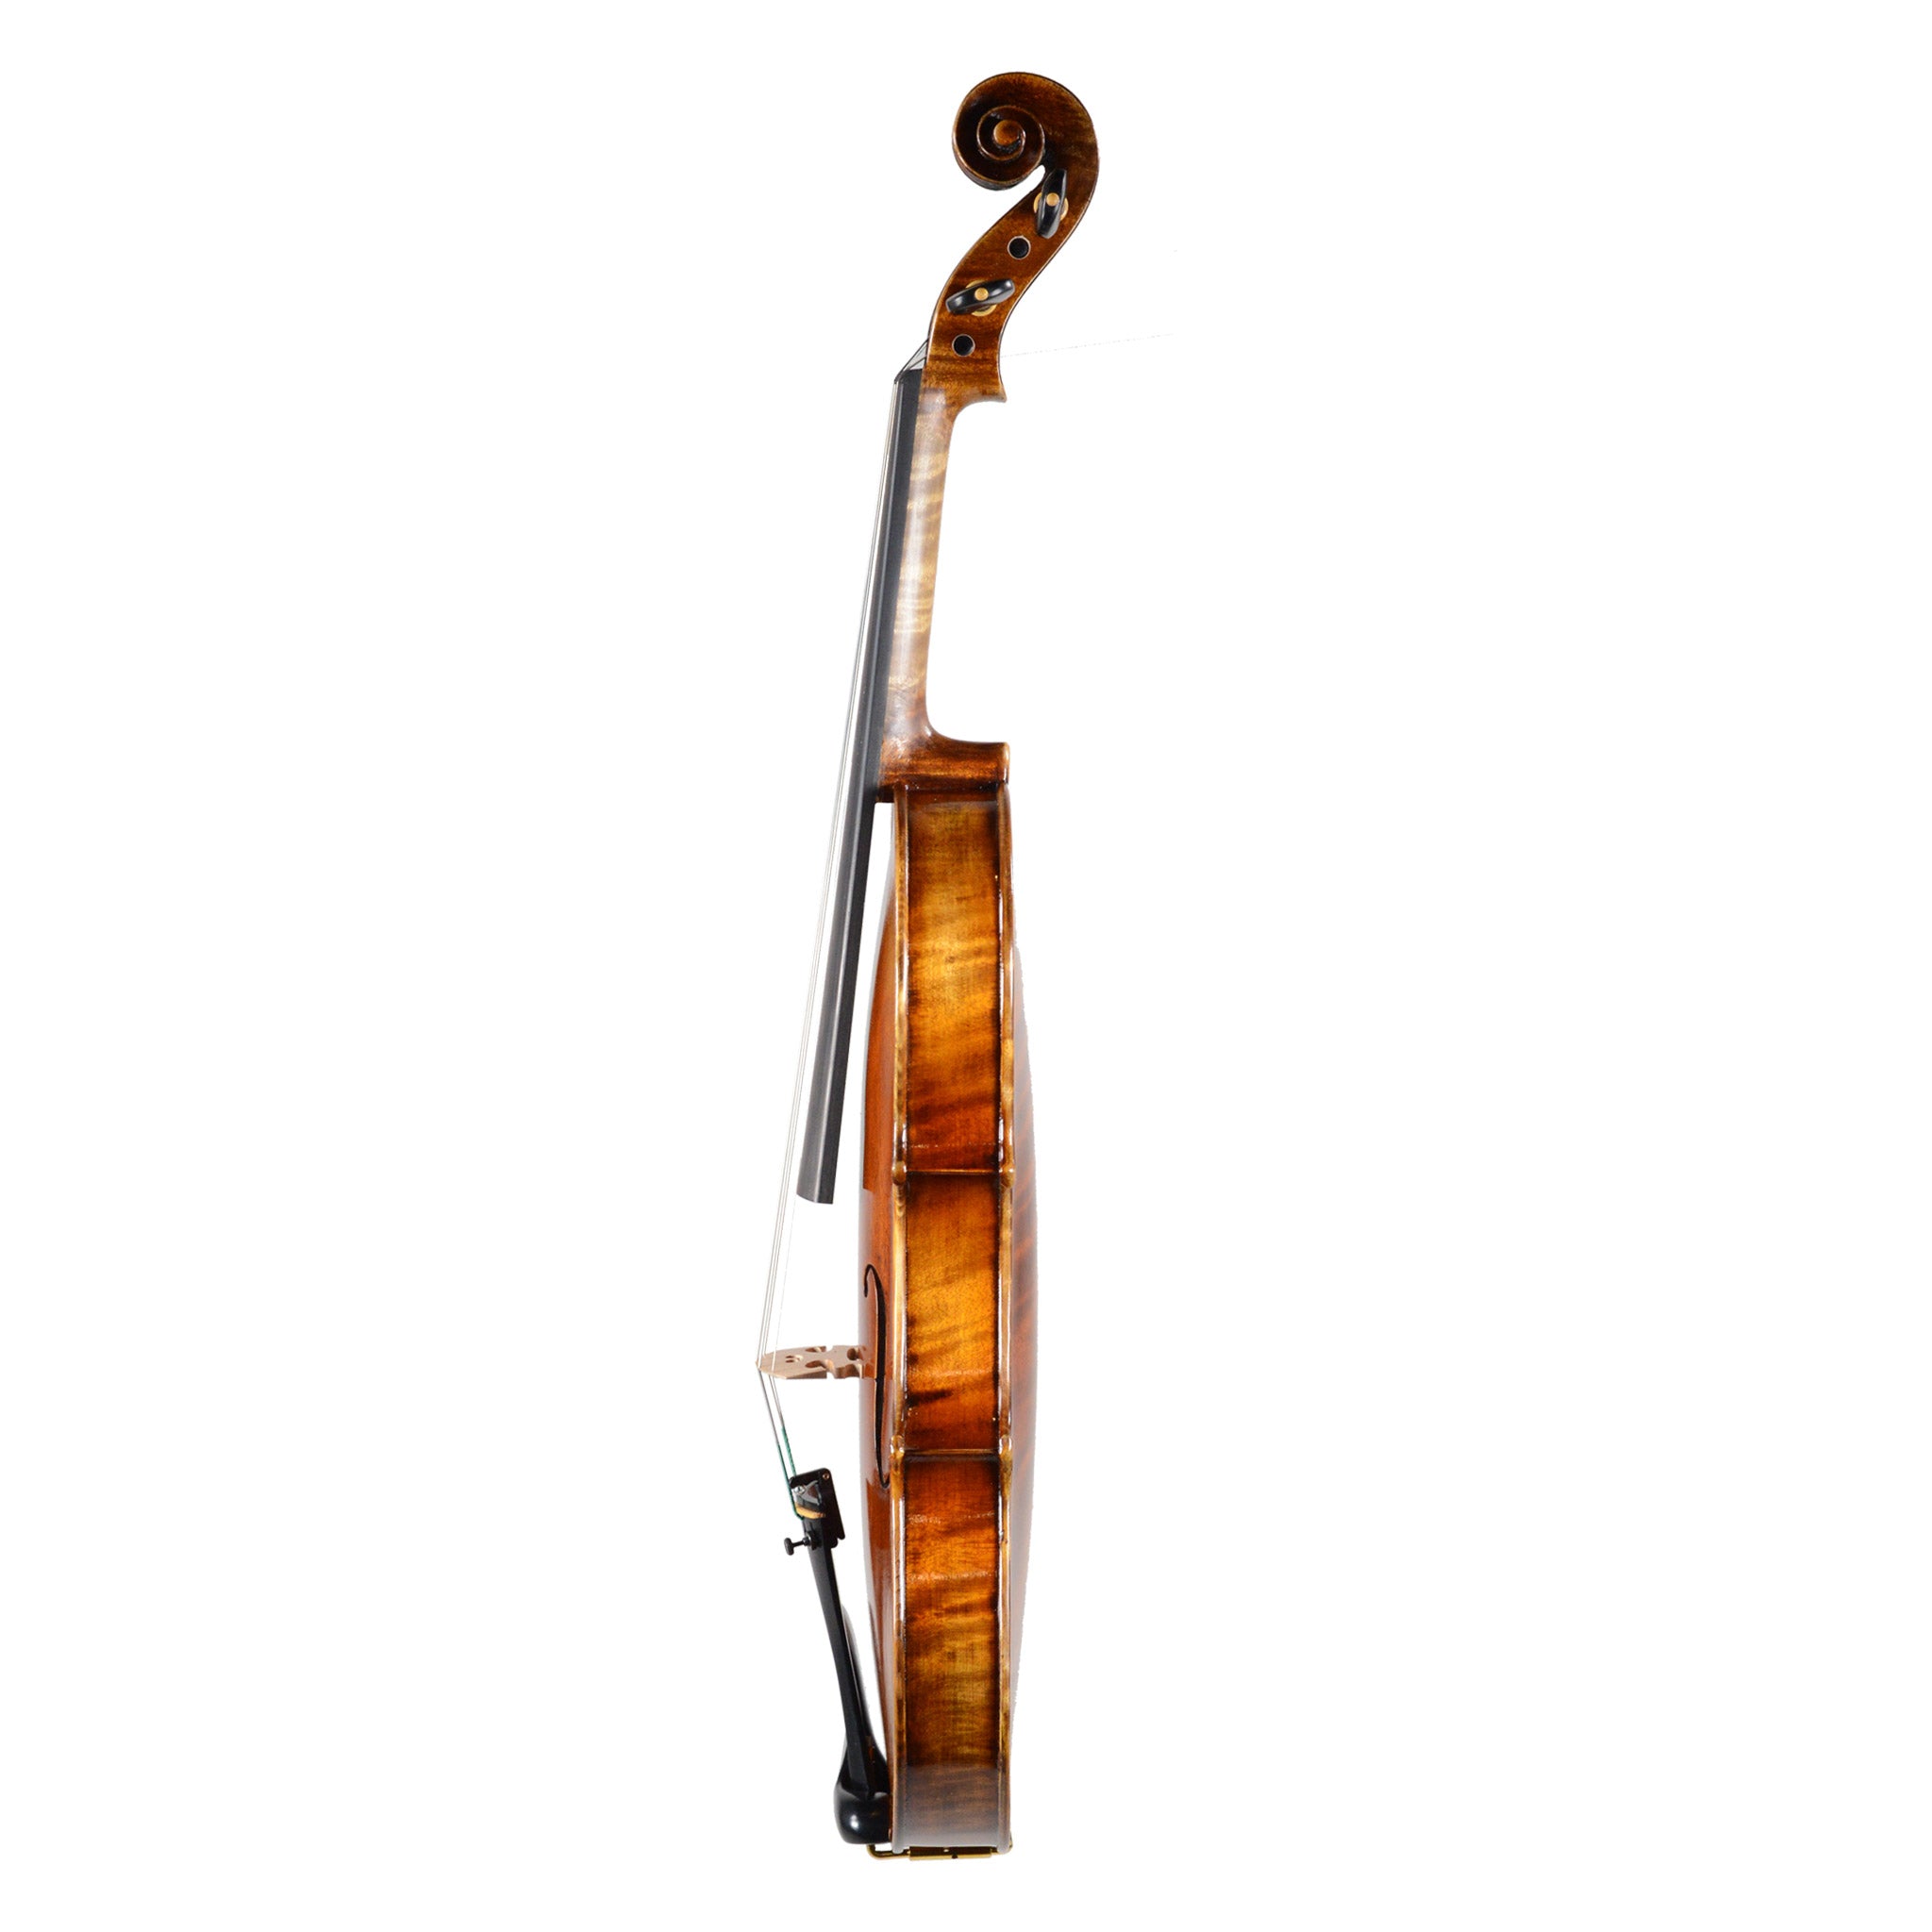 B-Stock Fiddlerman Master Violin Outfit